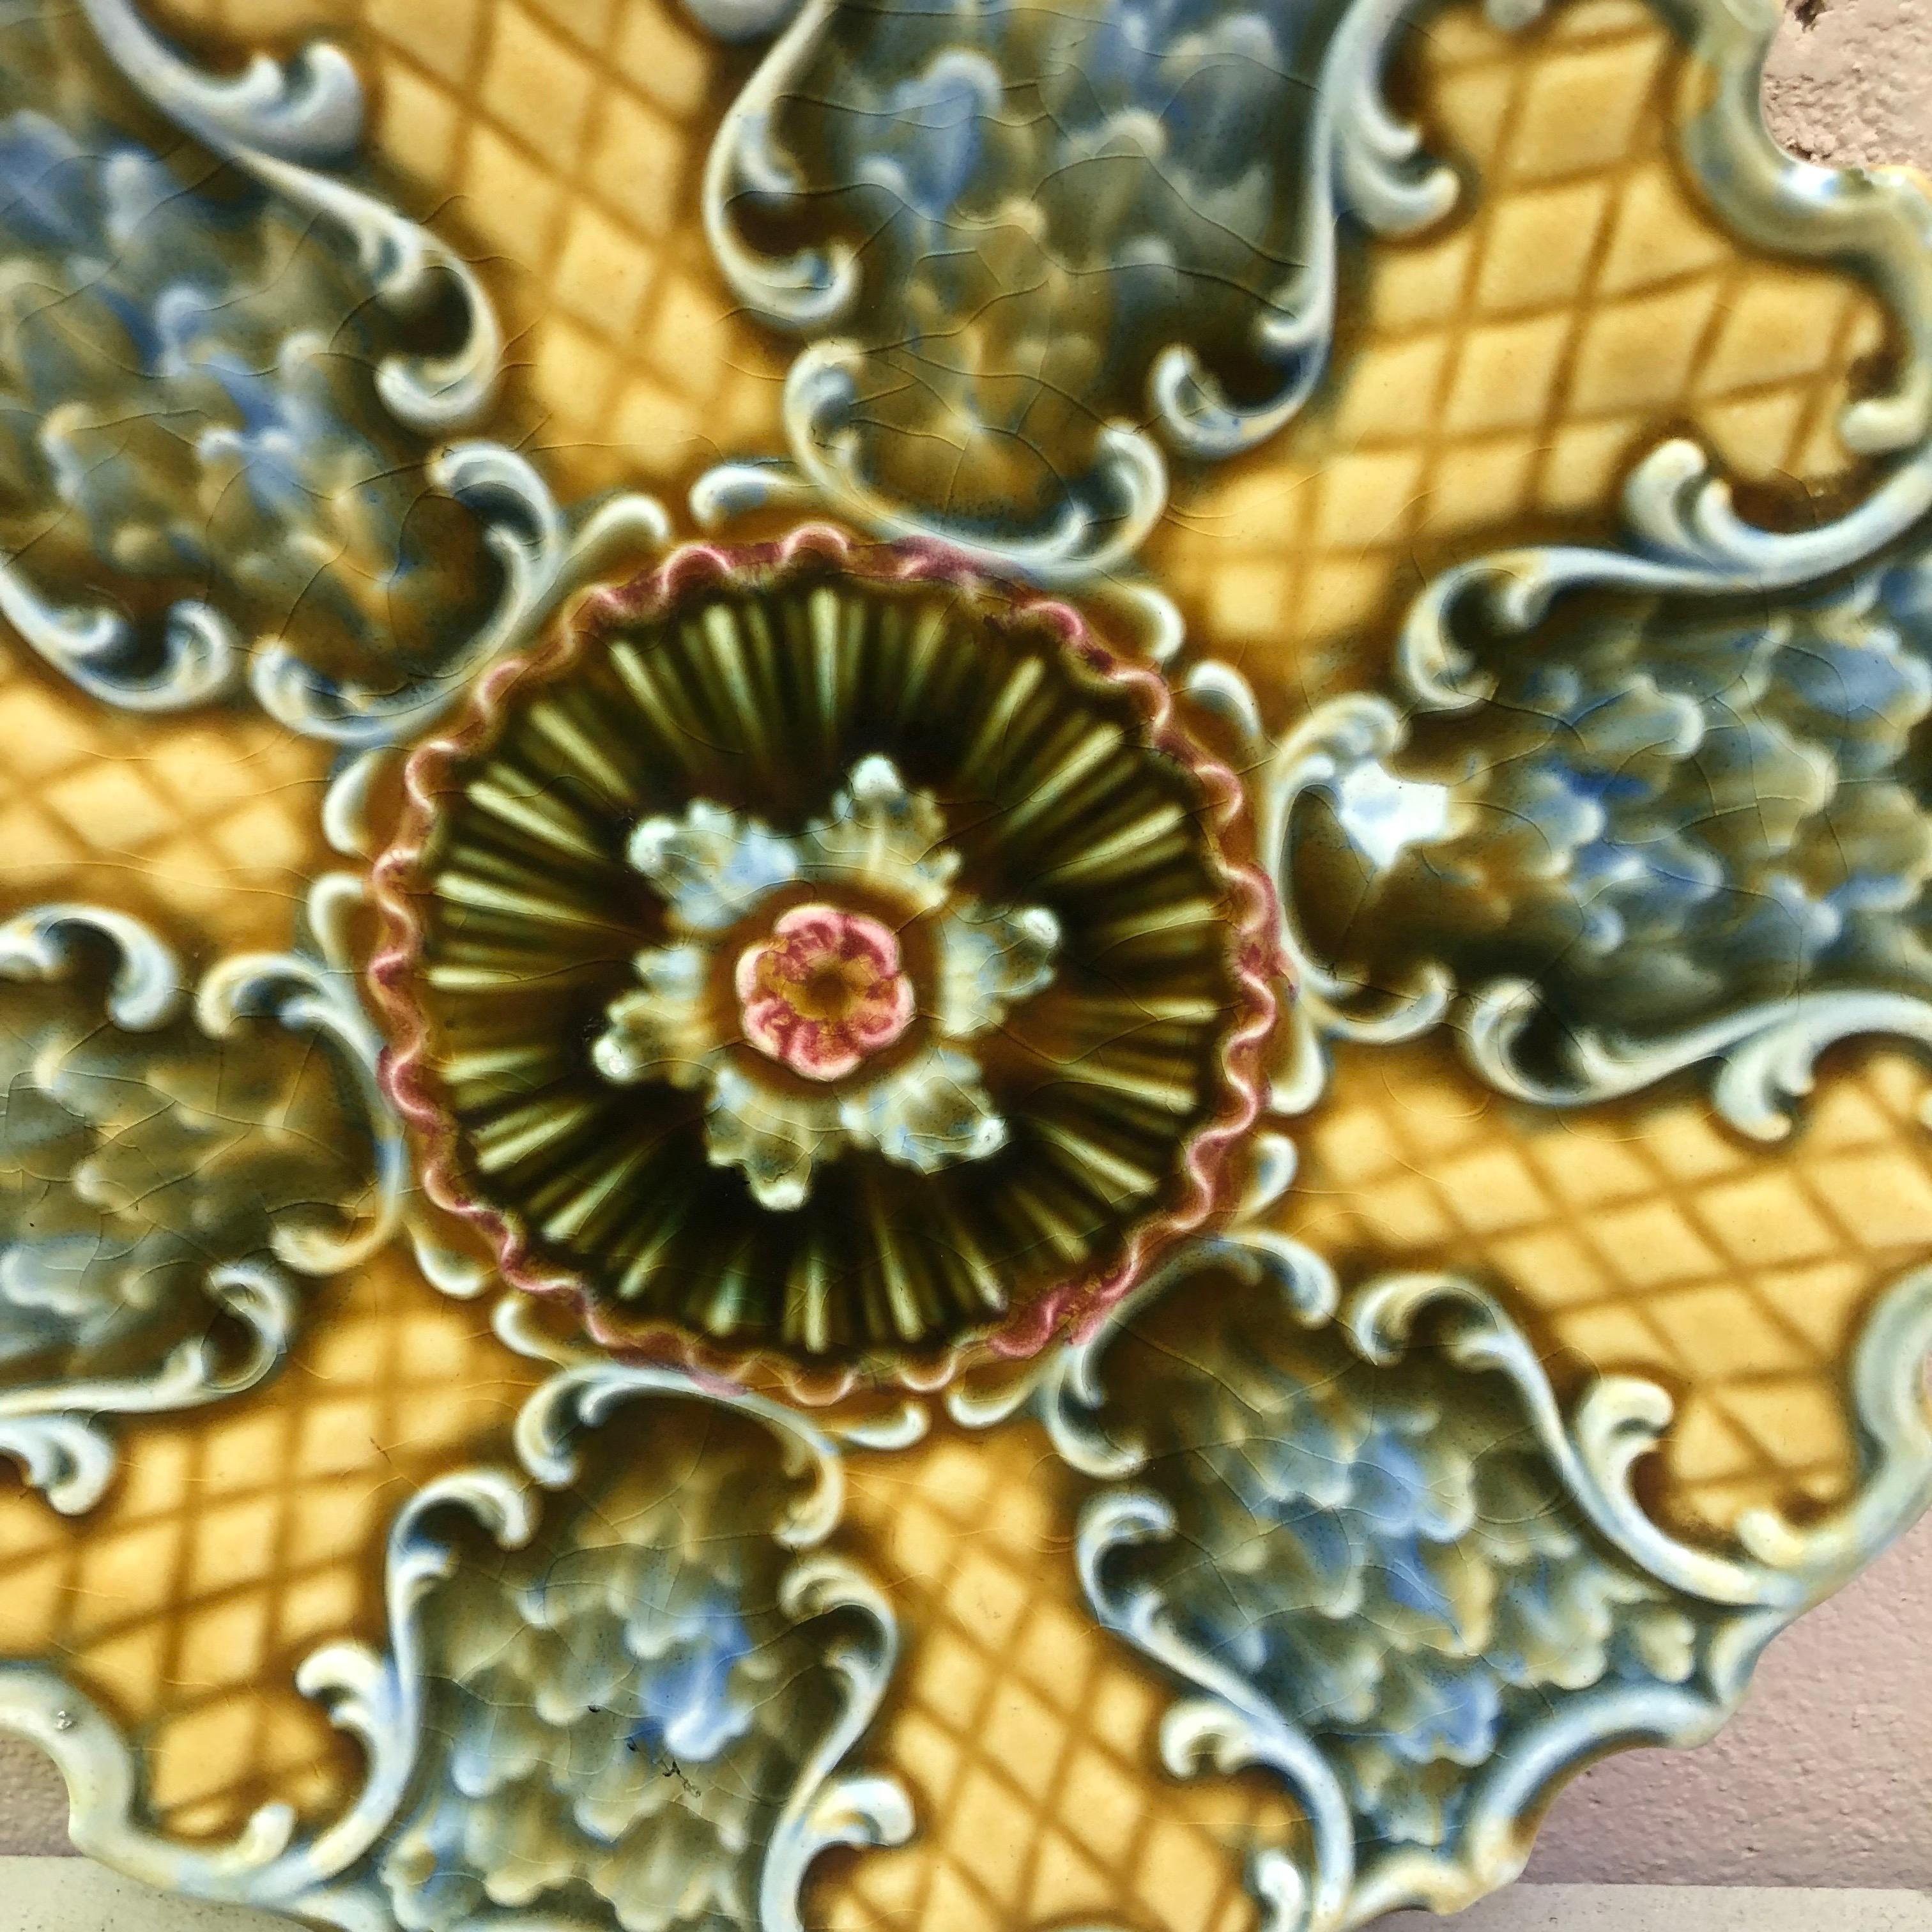 Majolica German plate circa 1900 with geometrical pattern and flower on the center.